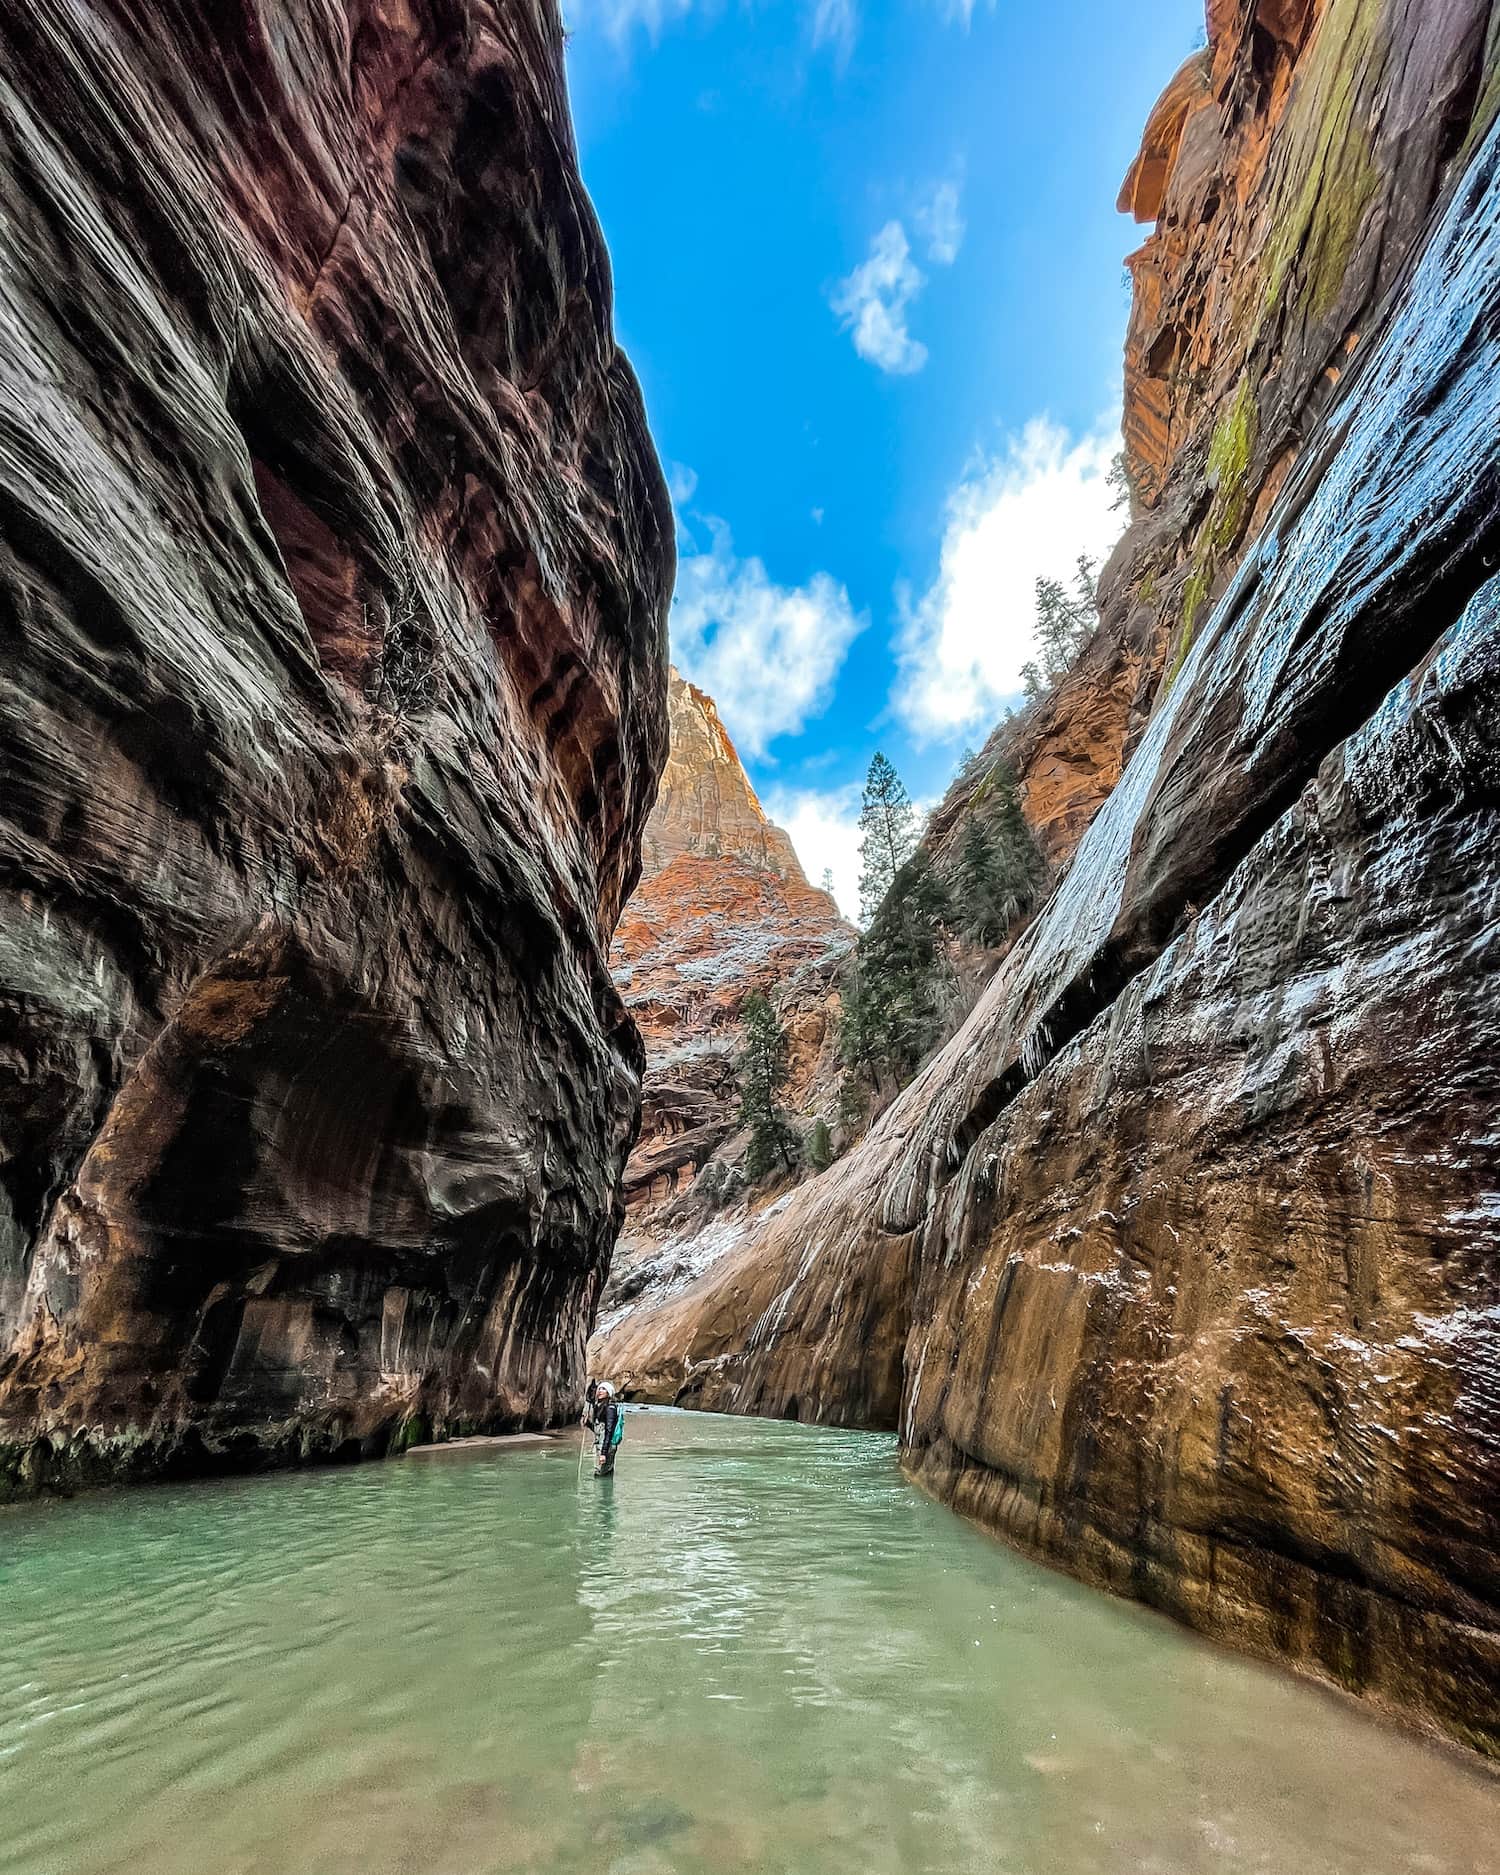 Me standing in the Narrows with gear; zion national park itinerary cover